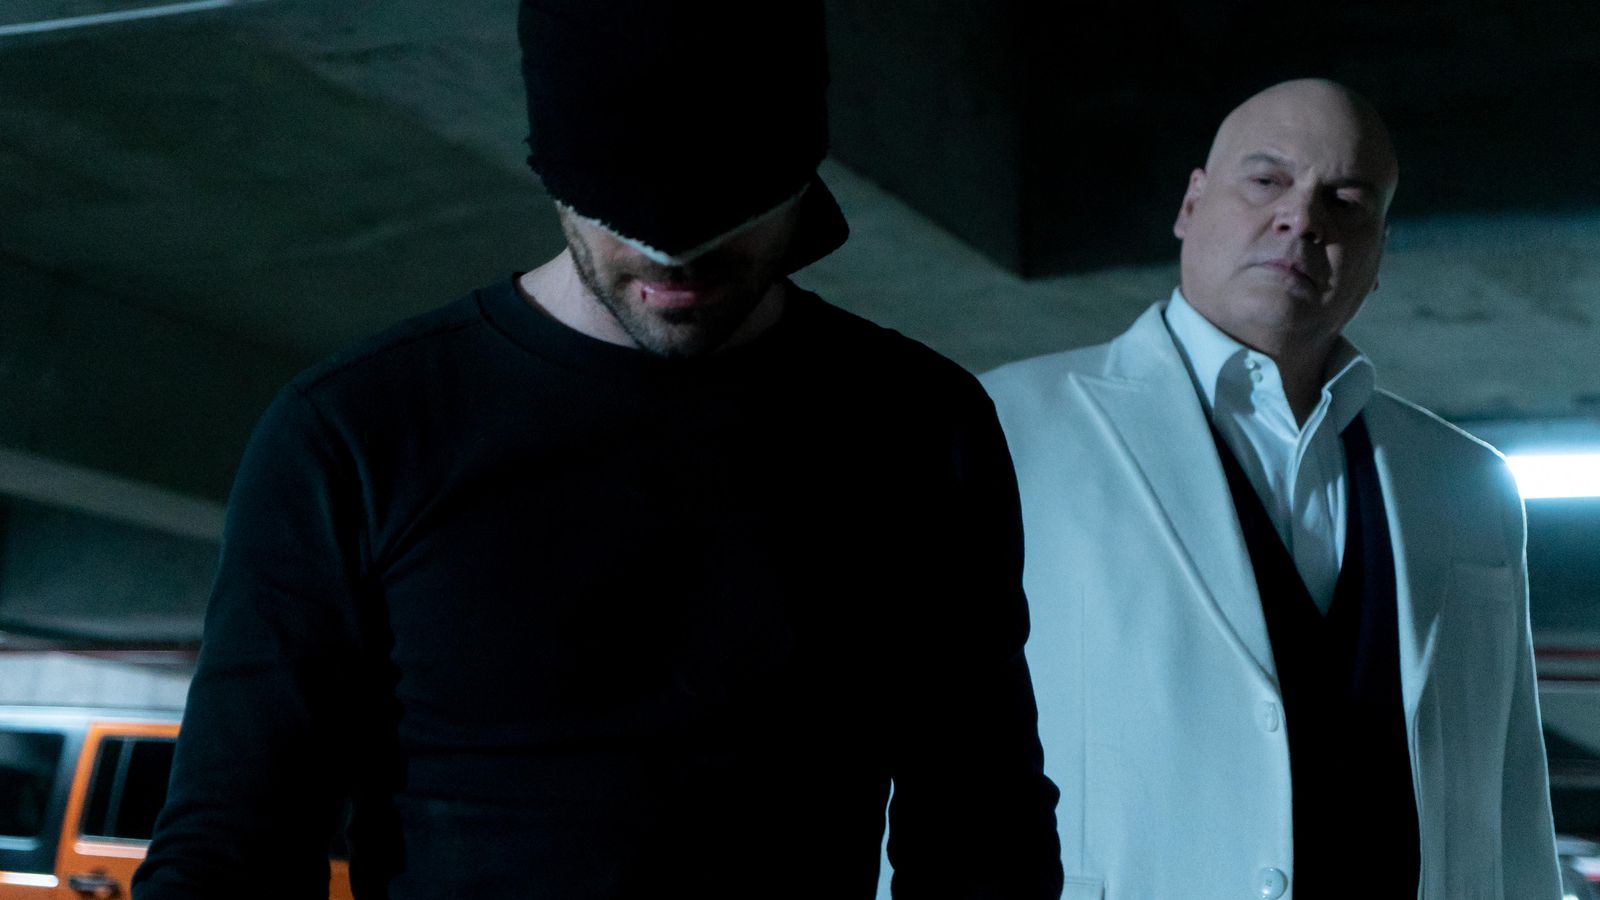 Daredevil: Charlie Cox confirmed that the Man Without Fear will return to the MCU